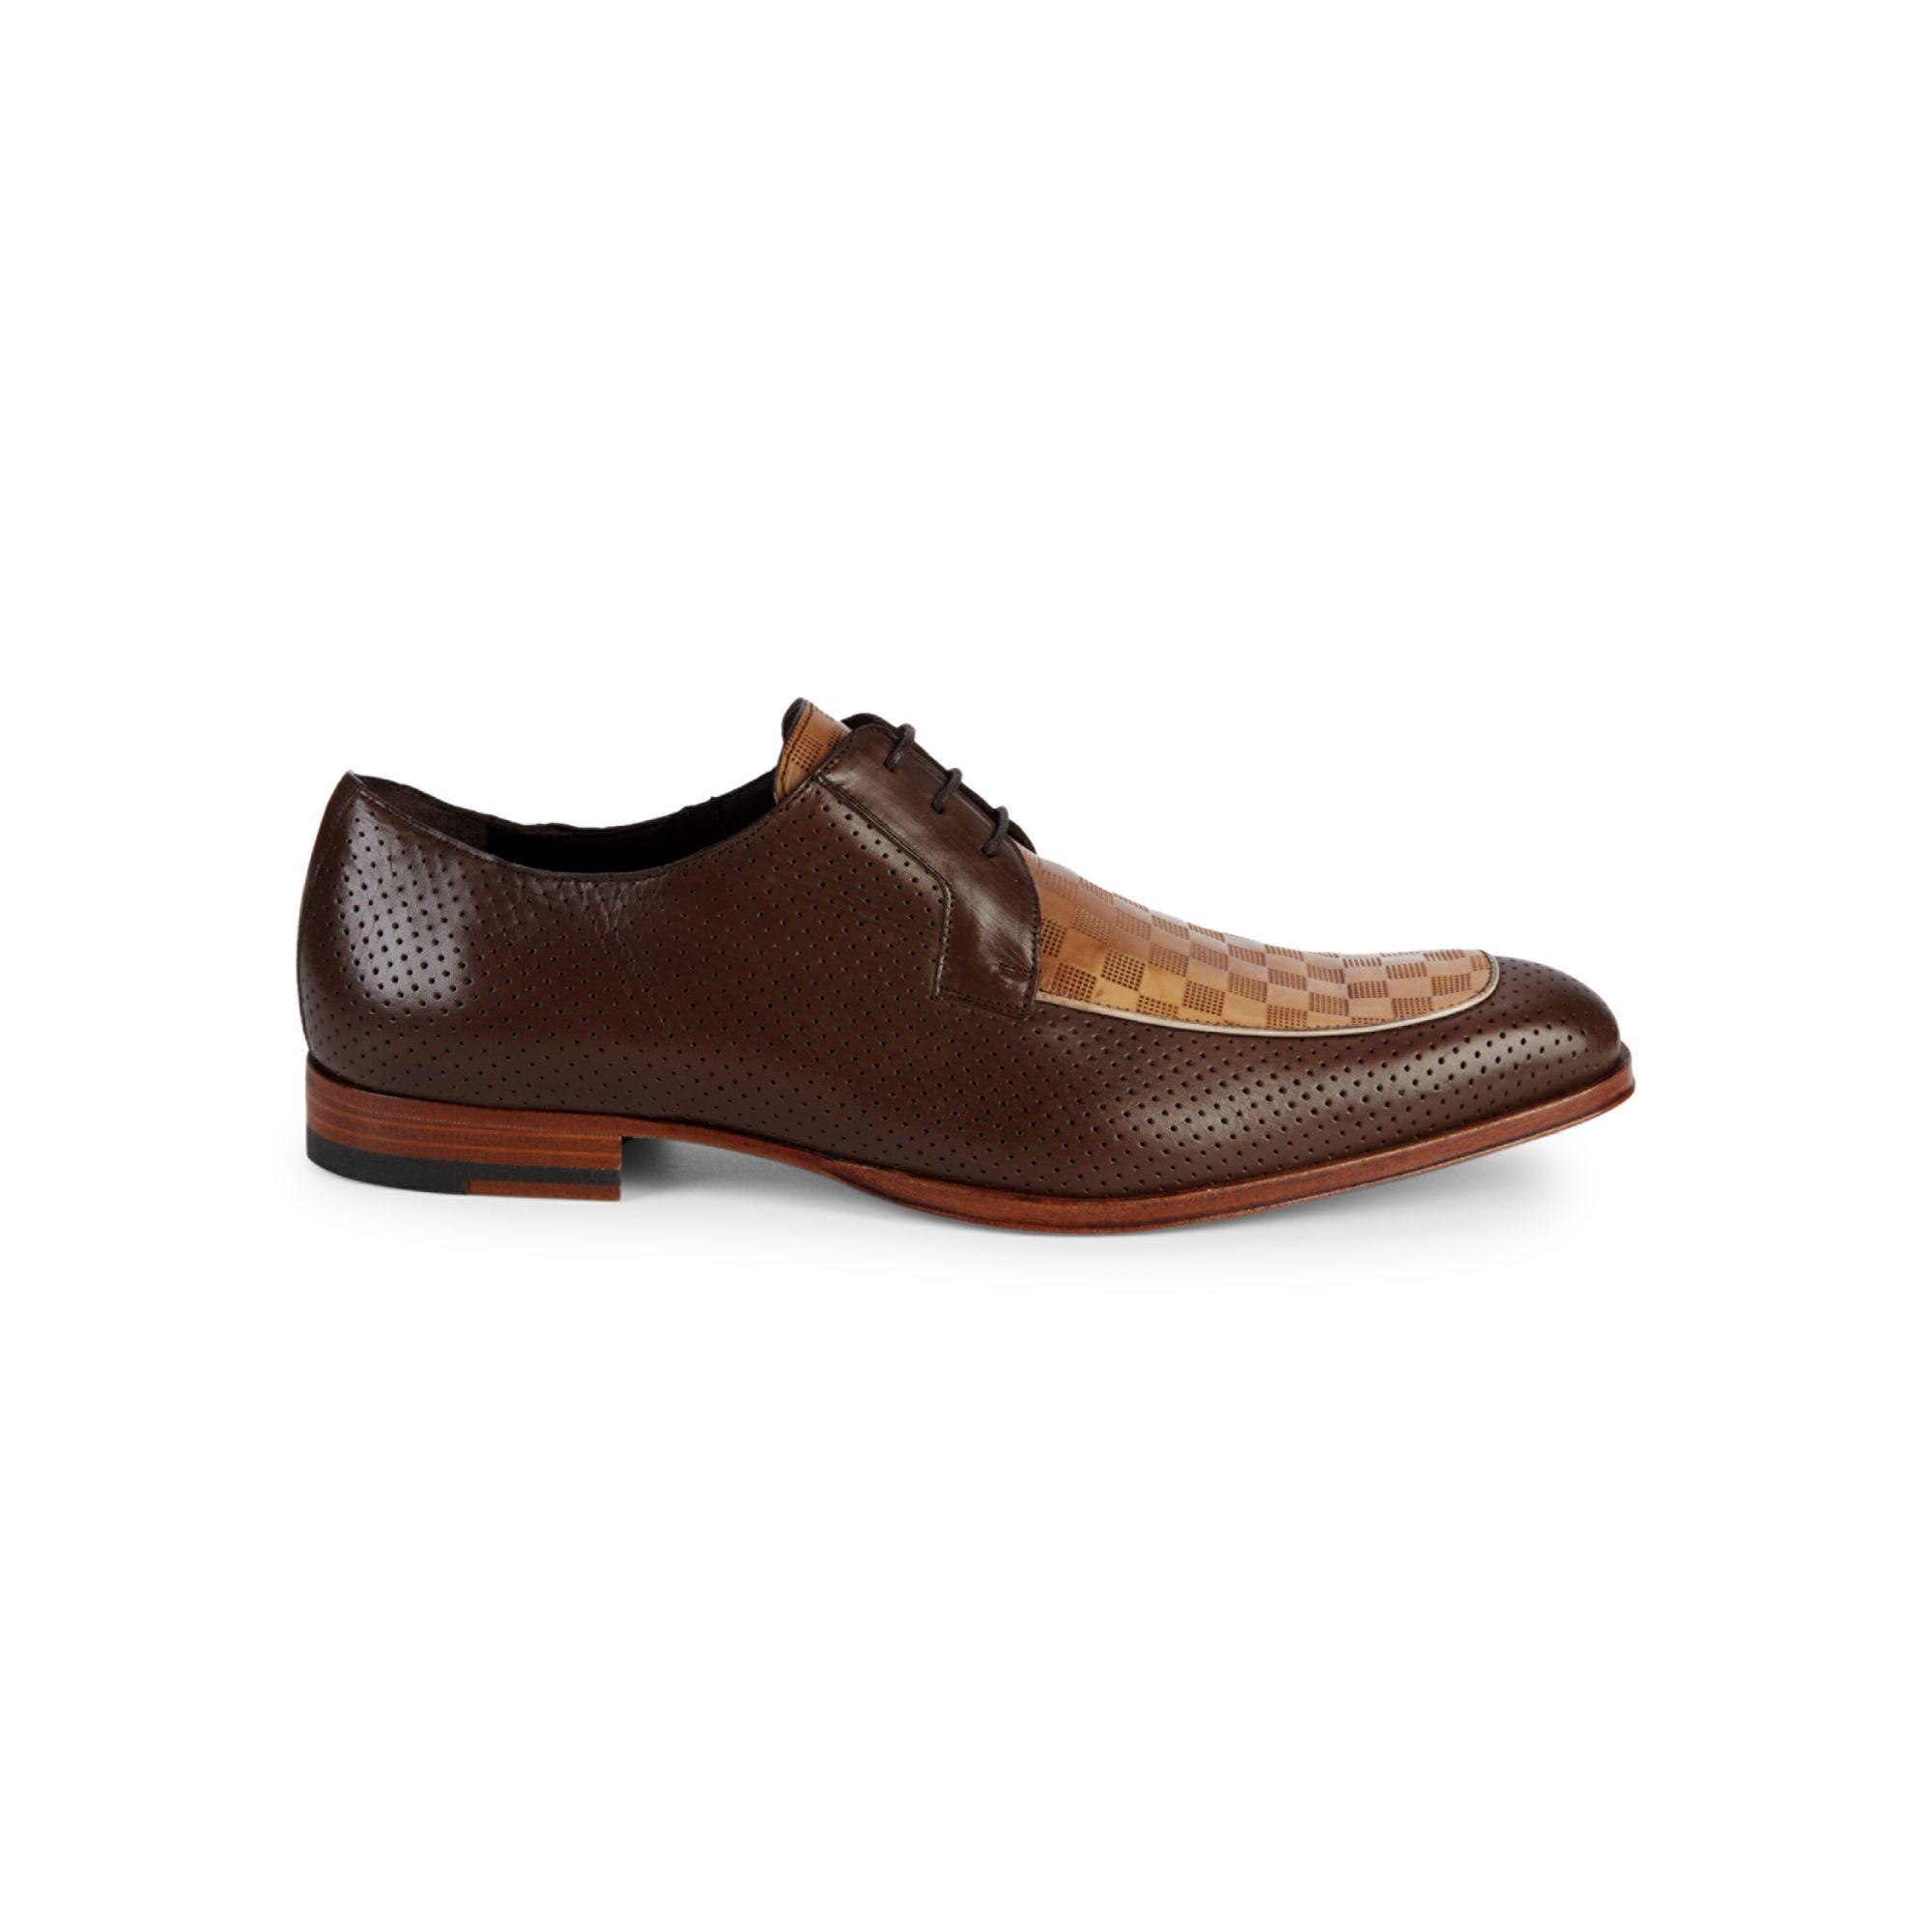 Mezlan Perforated Leather Derbys in Brown for Men - Lyst